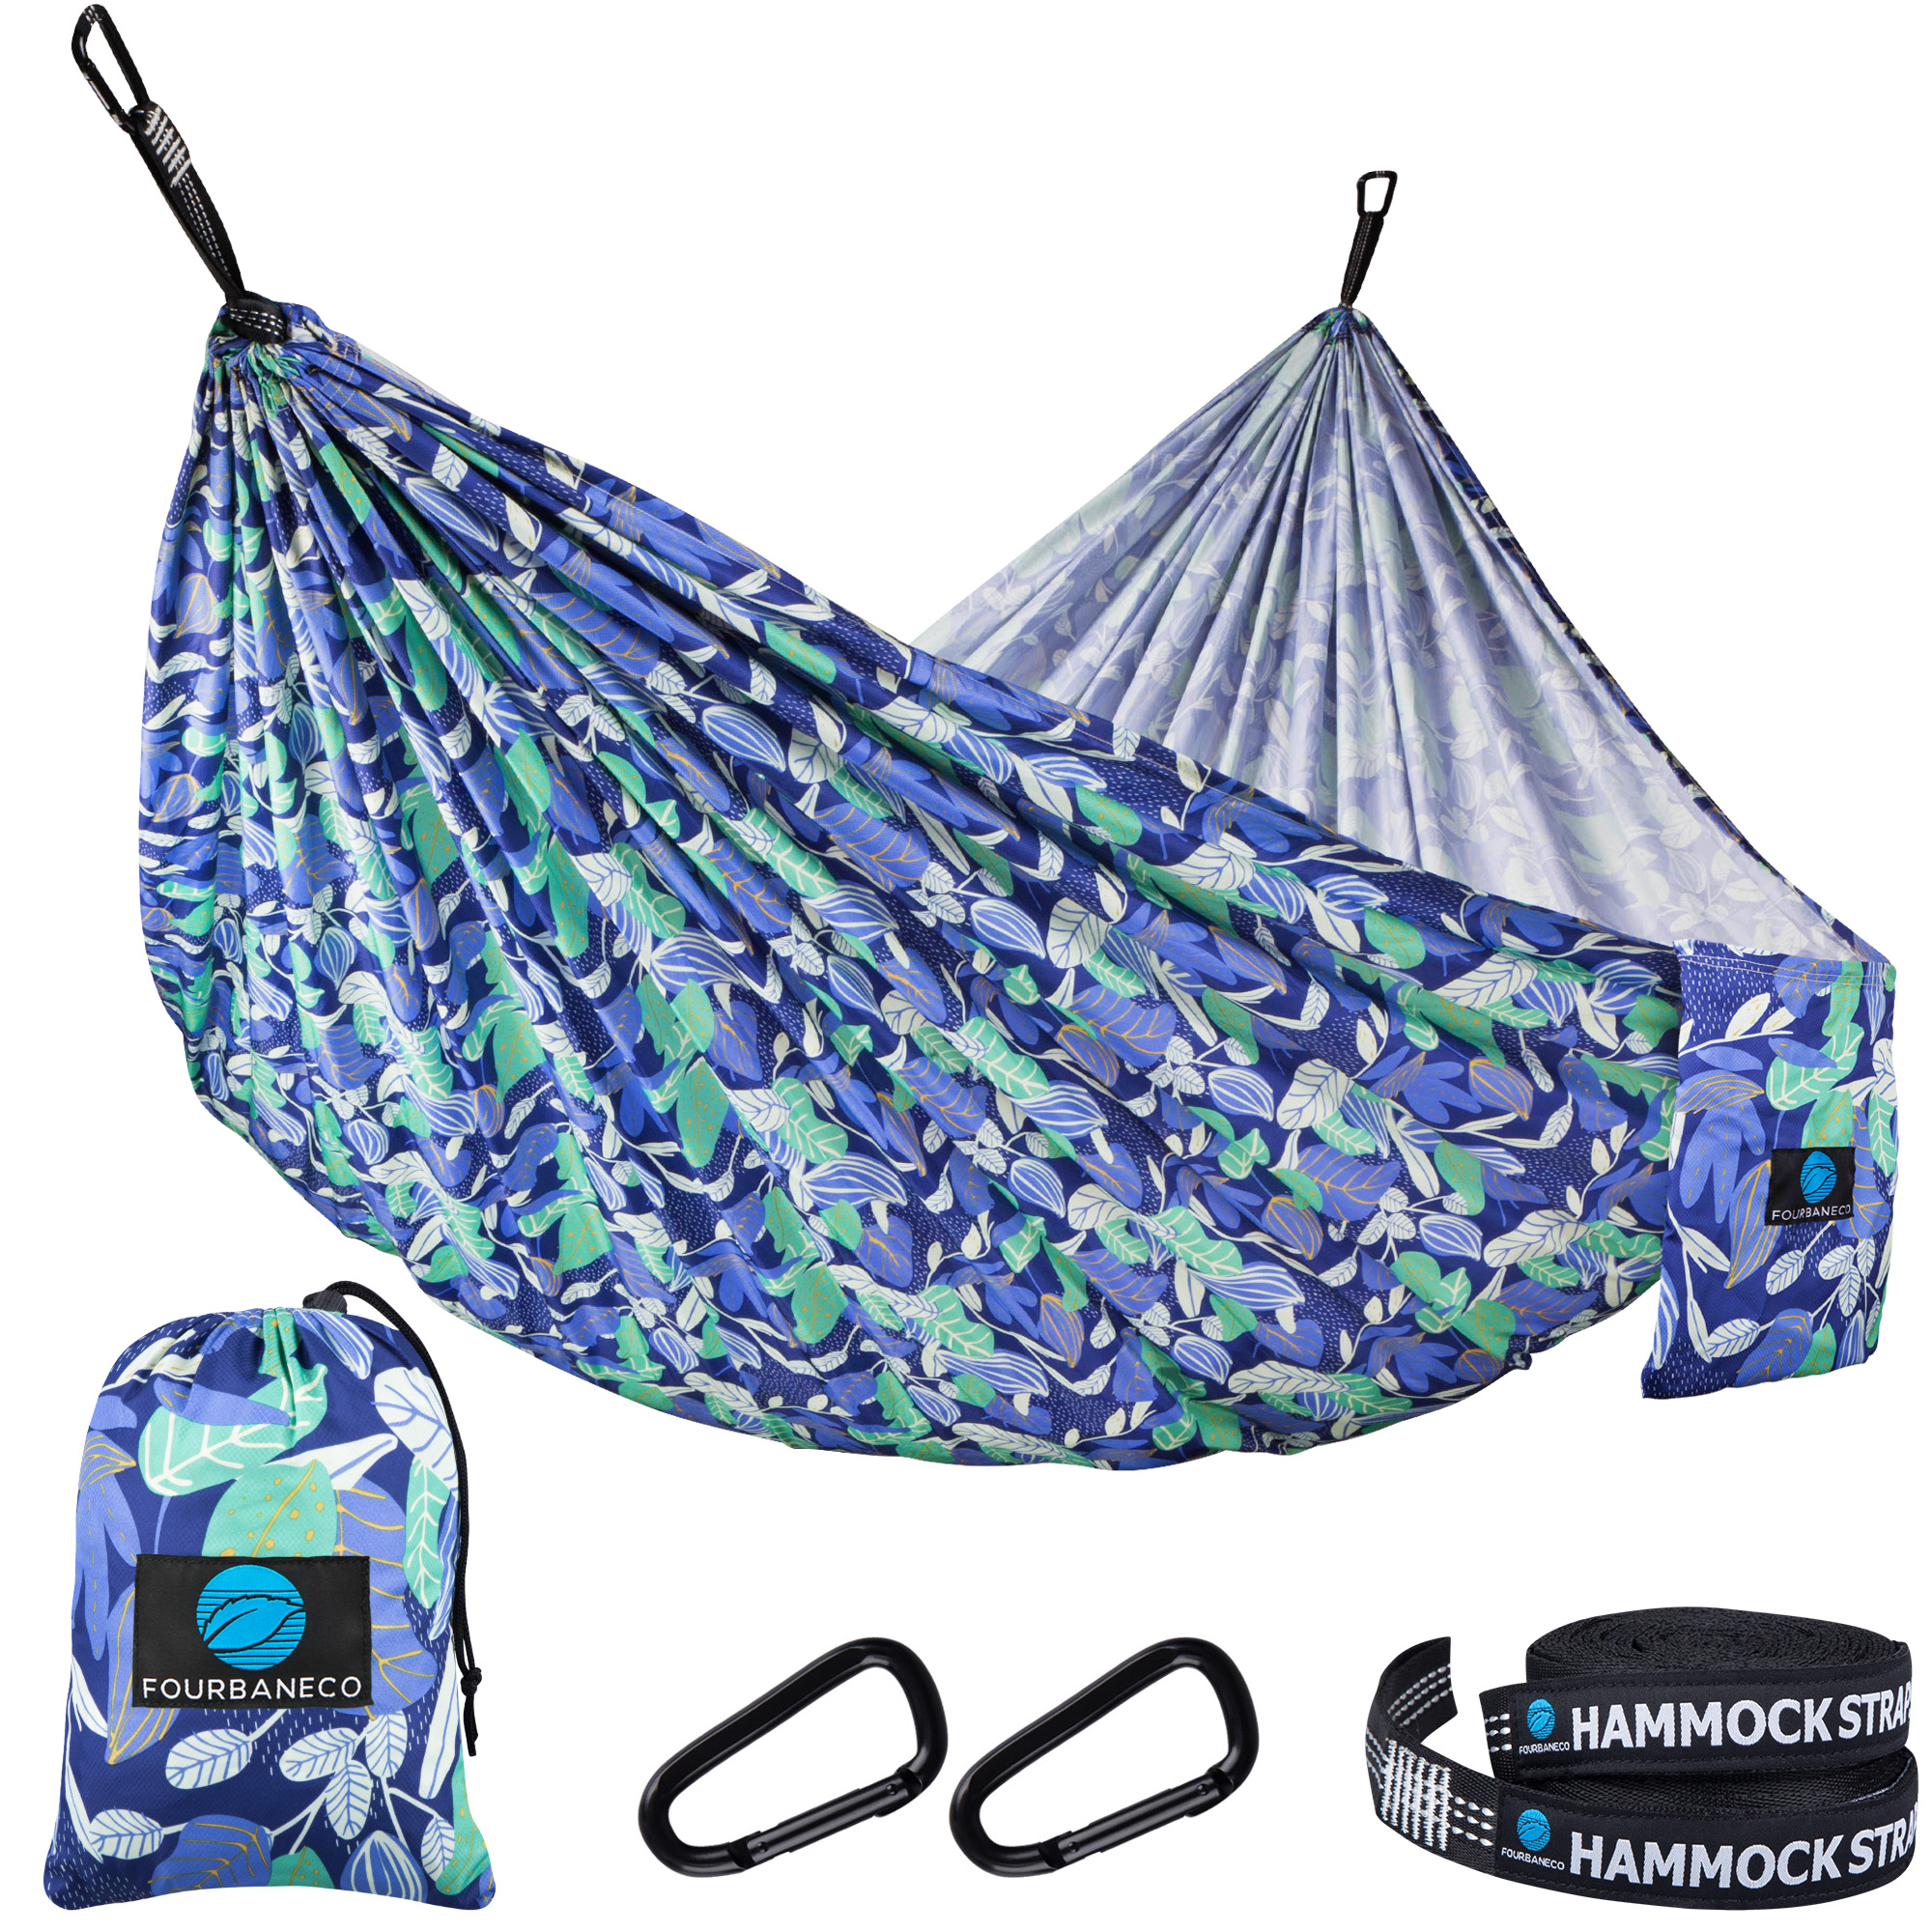 Lightweight Portable Double Hammock for Hiking Backpacking Travel Beach Yard 